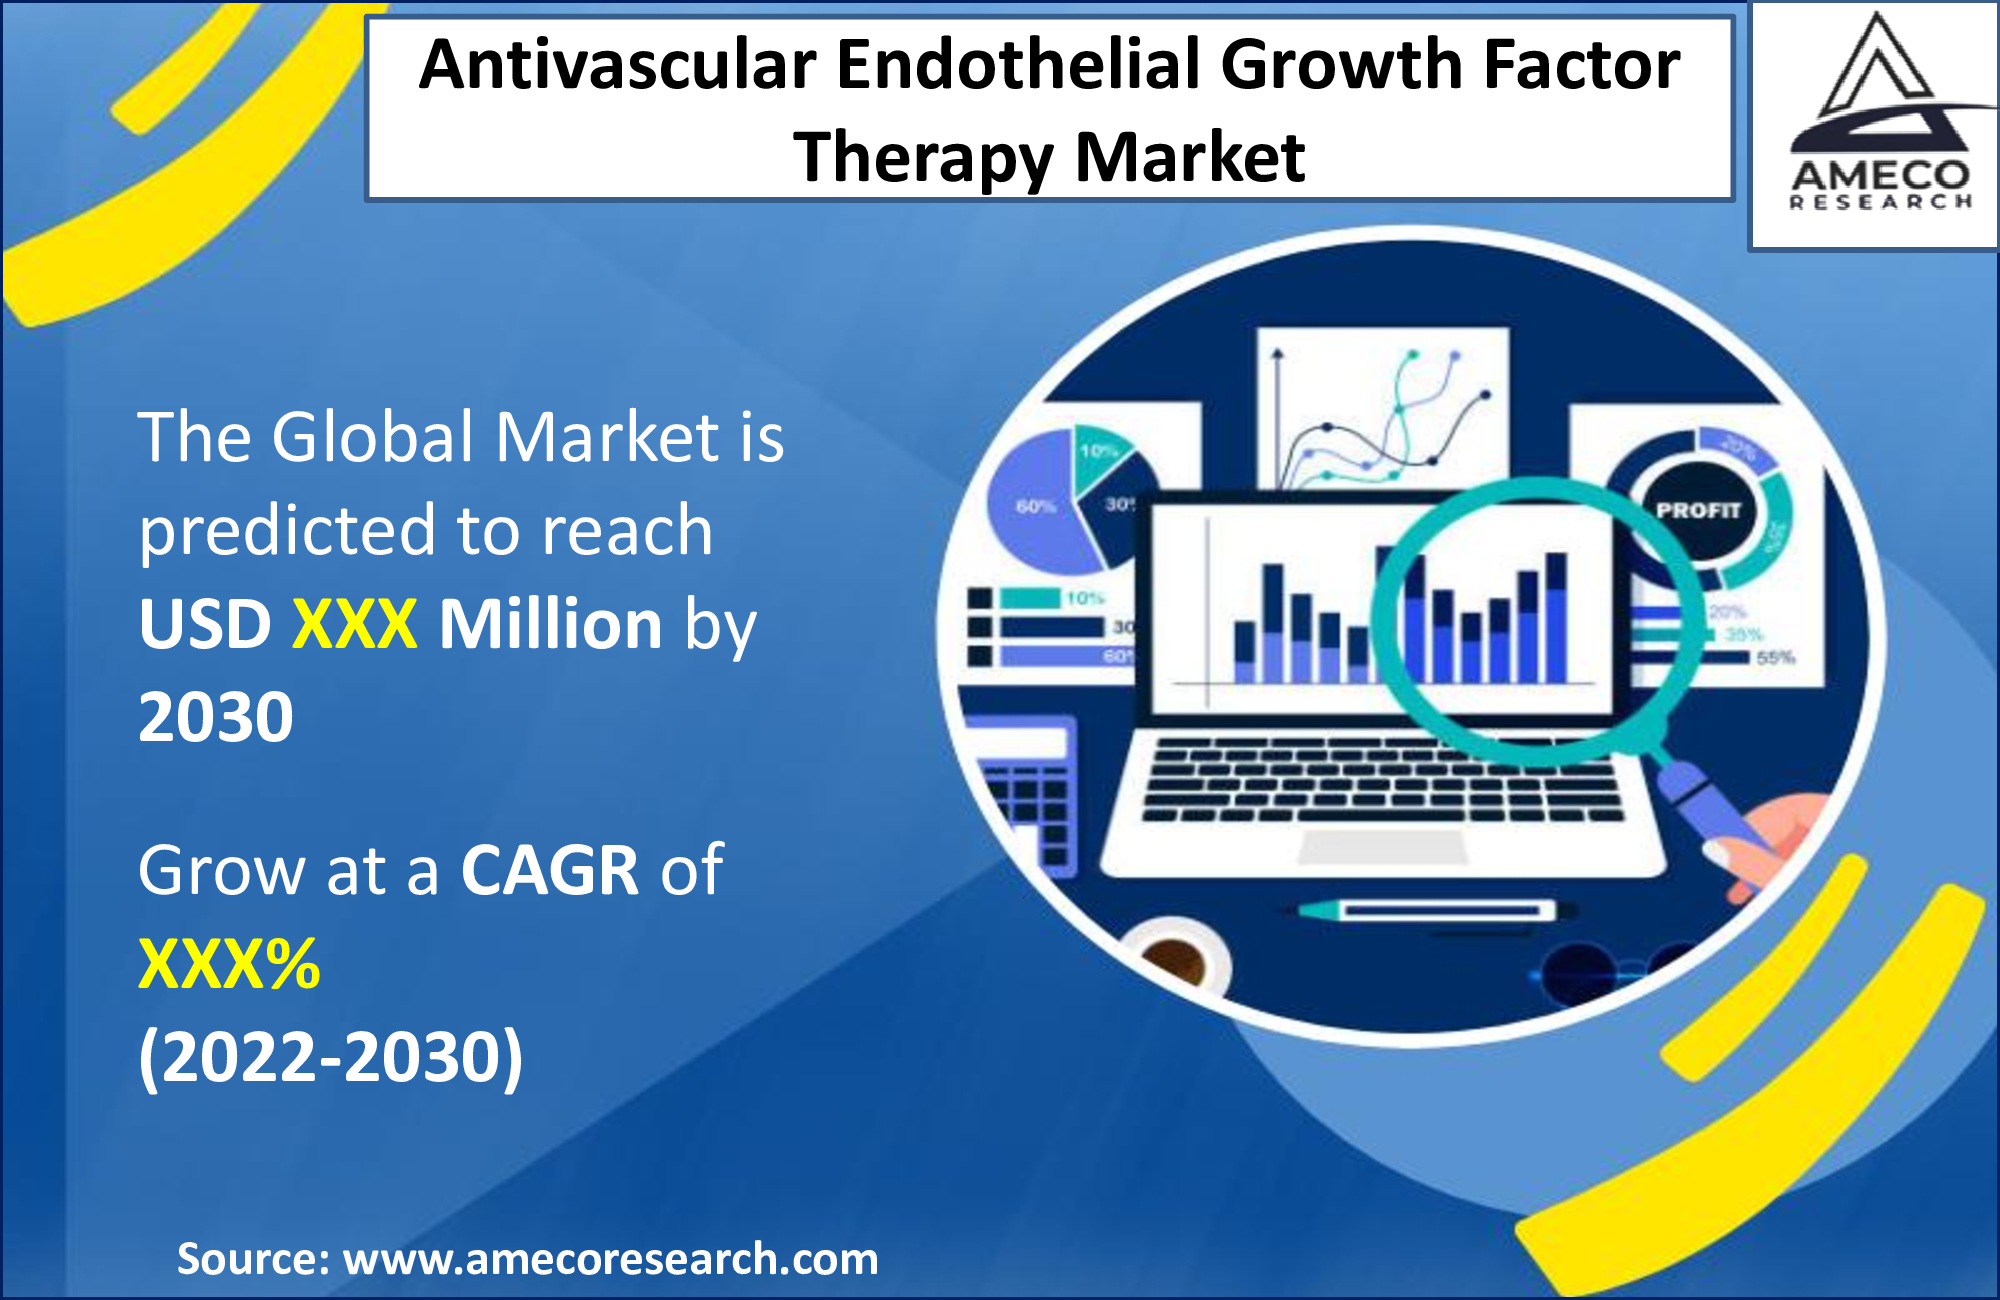 Antivascular Endothelial Growth Factor Therapy Market